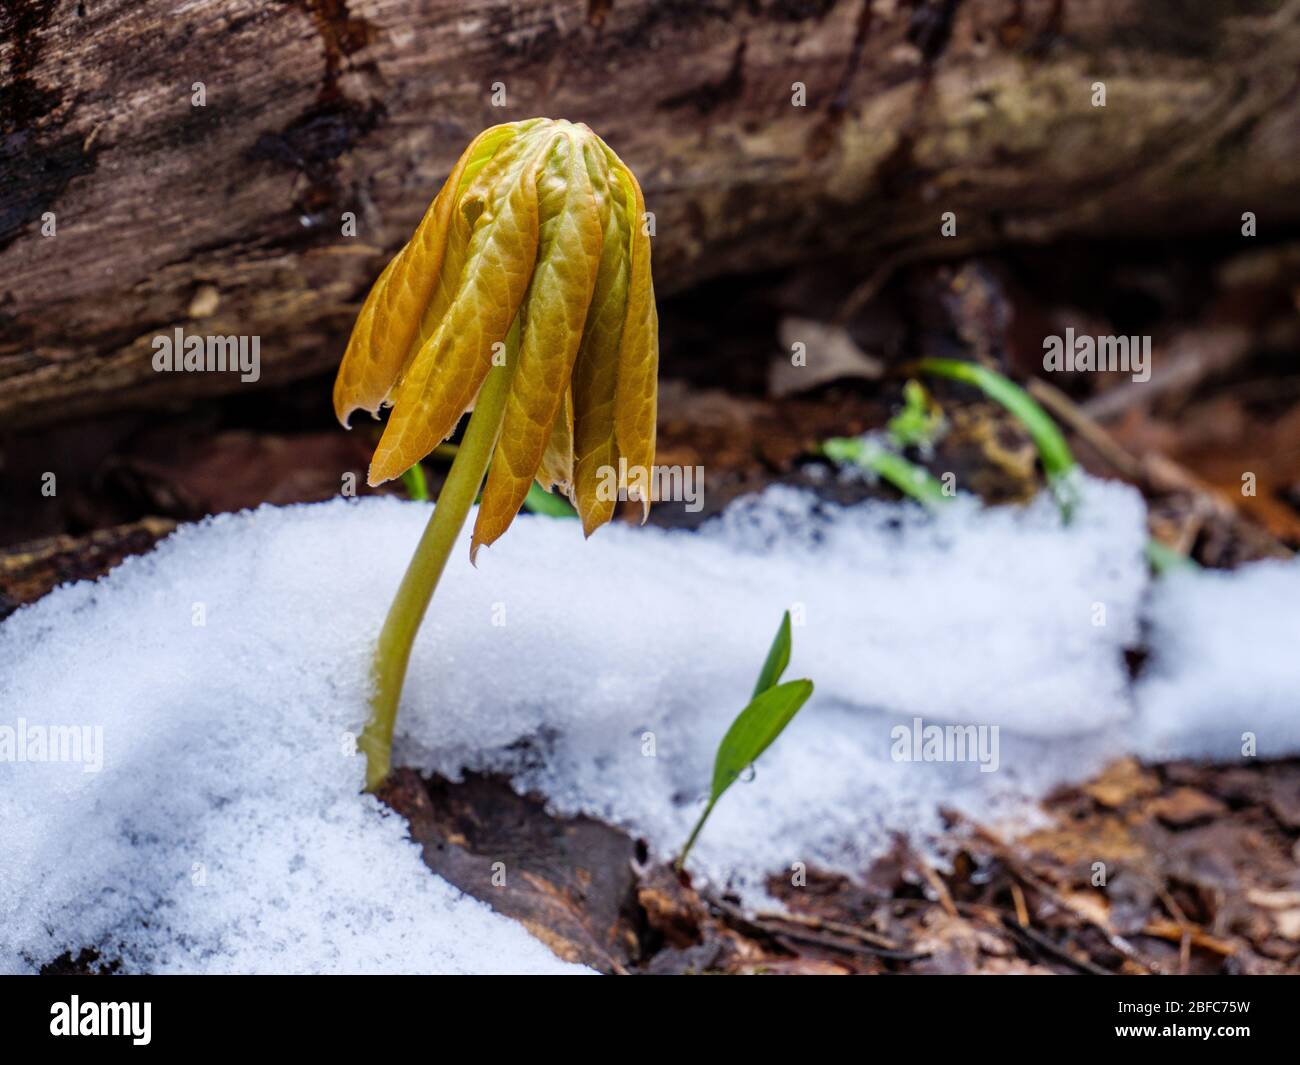 Mayapple emerging through spring snow. The plant produces podophyllotoxin, which can be used in anticancer drugs. Stock Photo